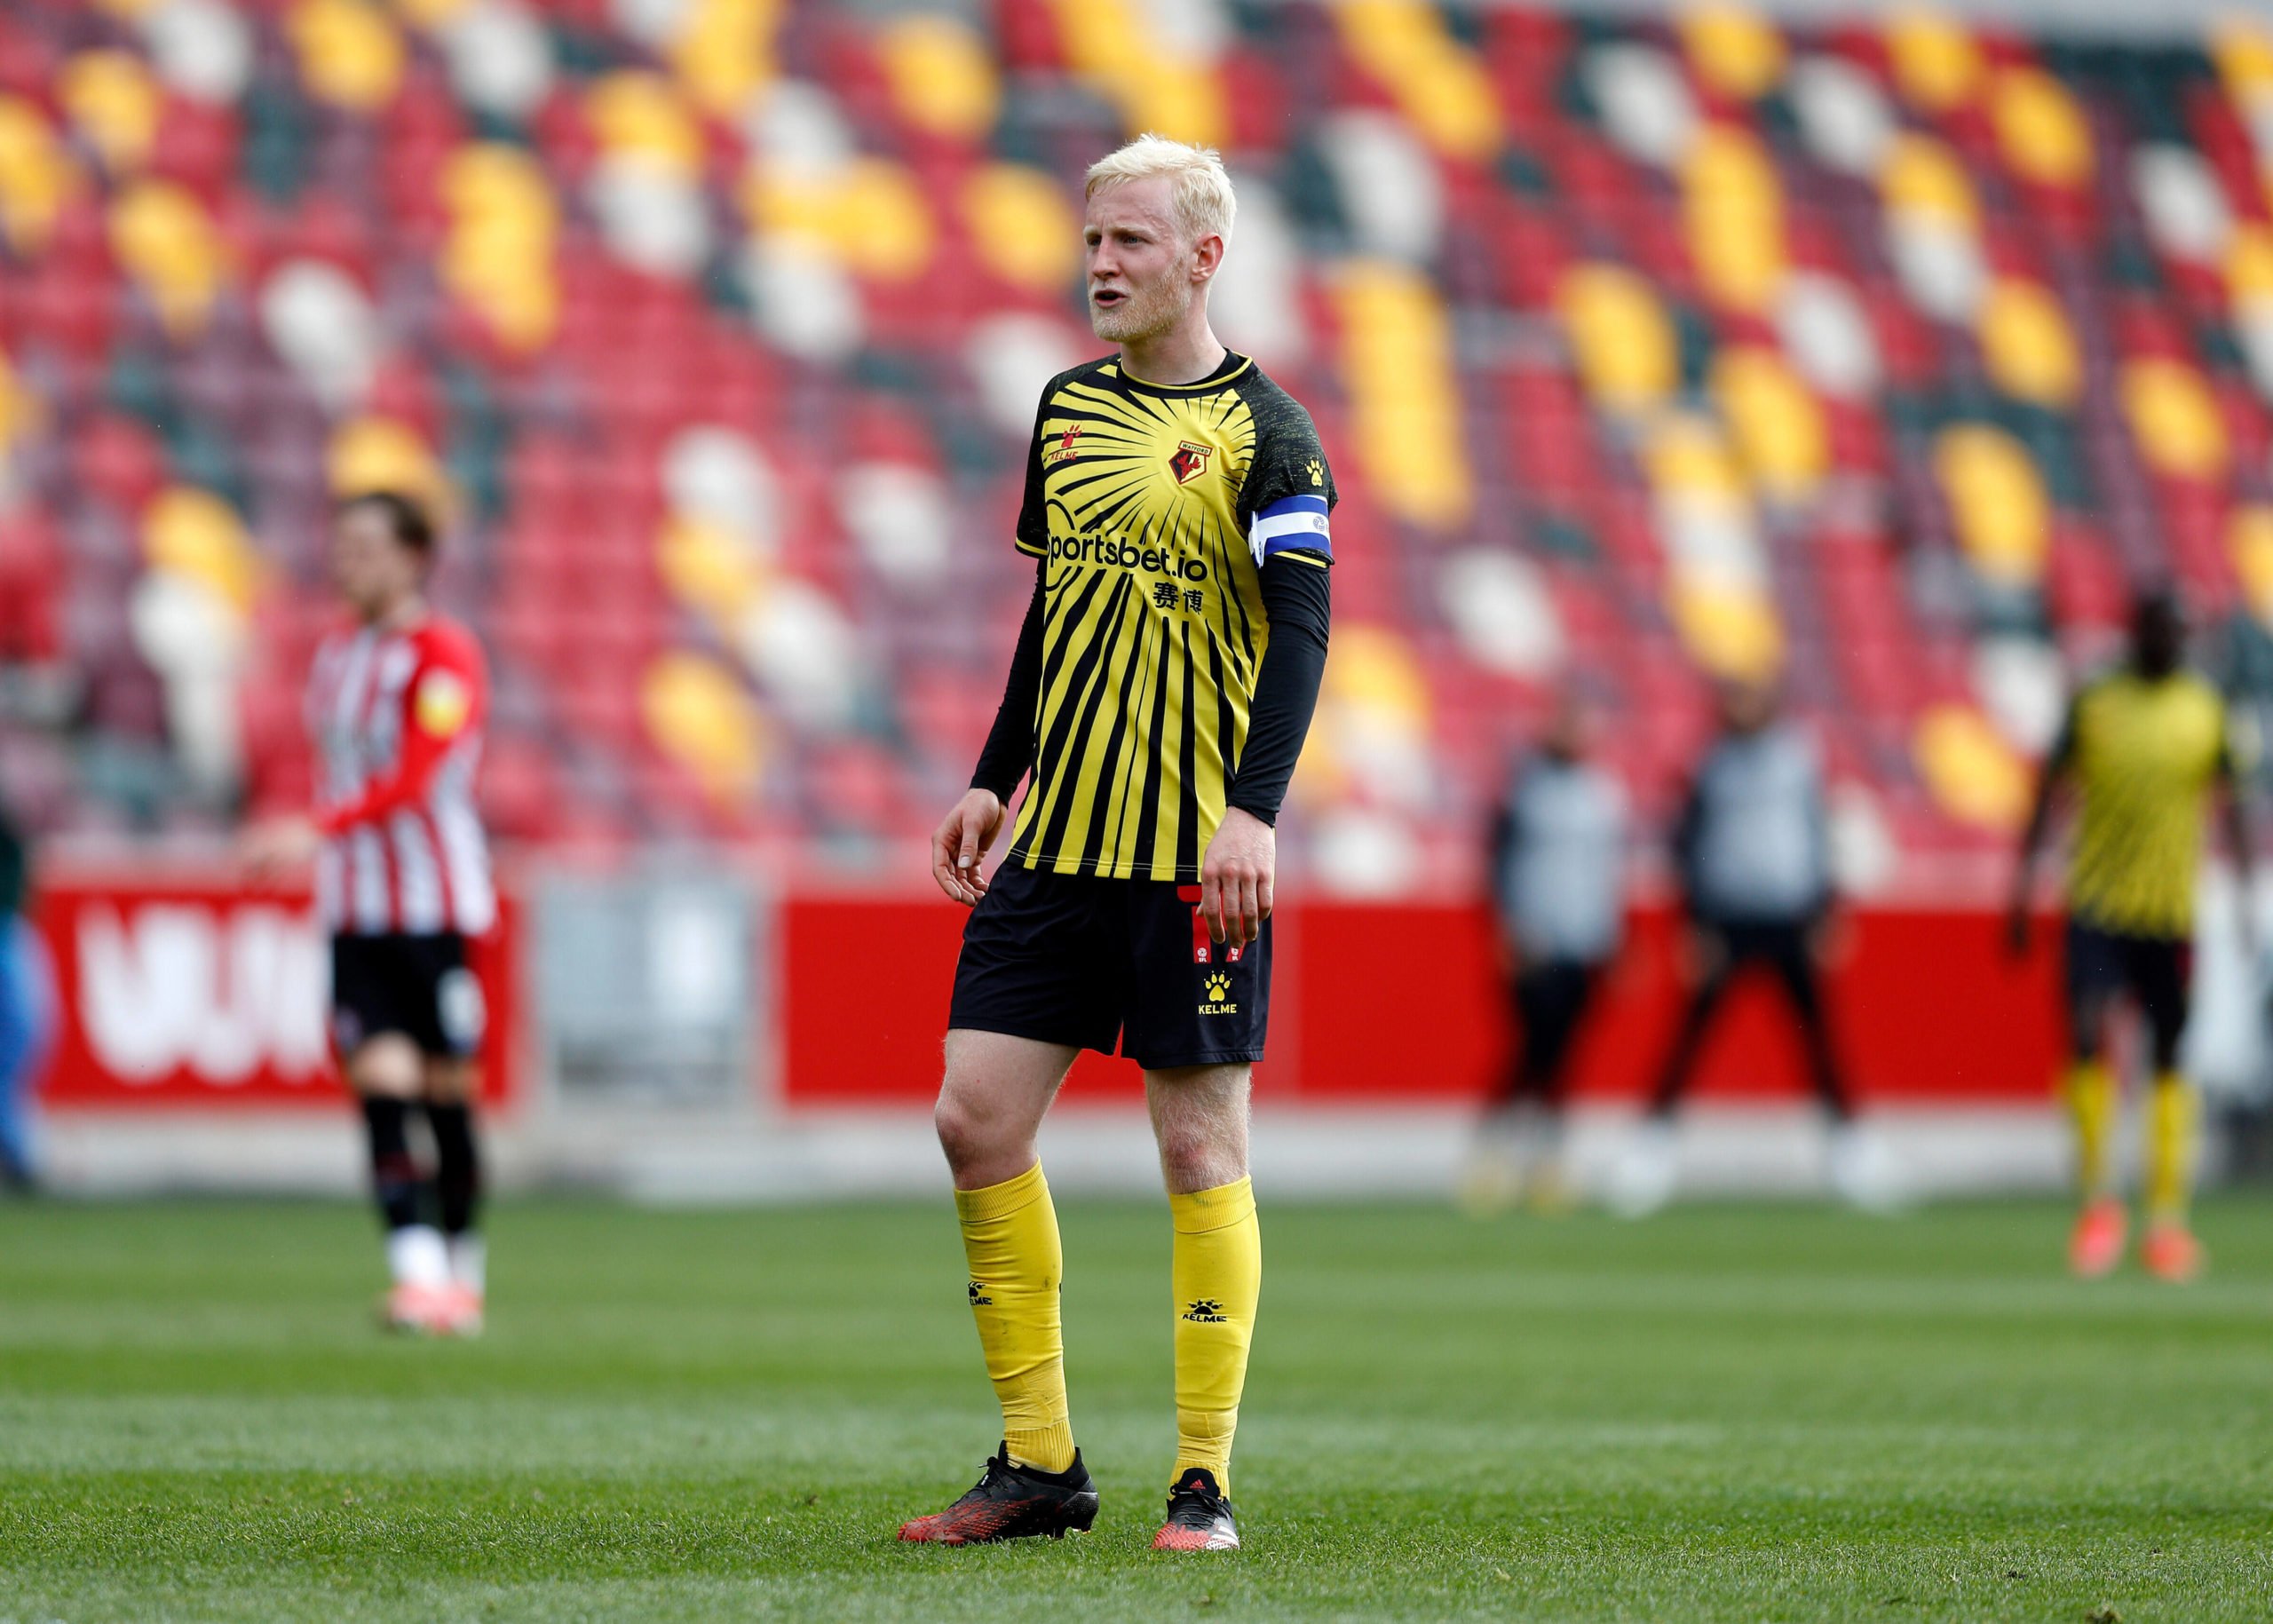 Aston Villa keeping a keen eye on Will Hughes who is seen in the photo